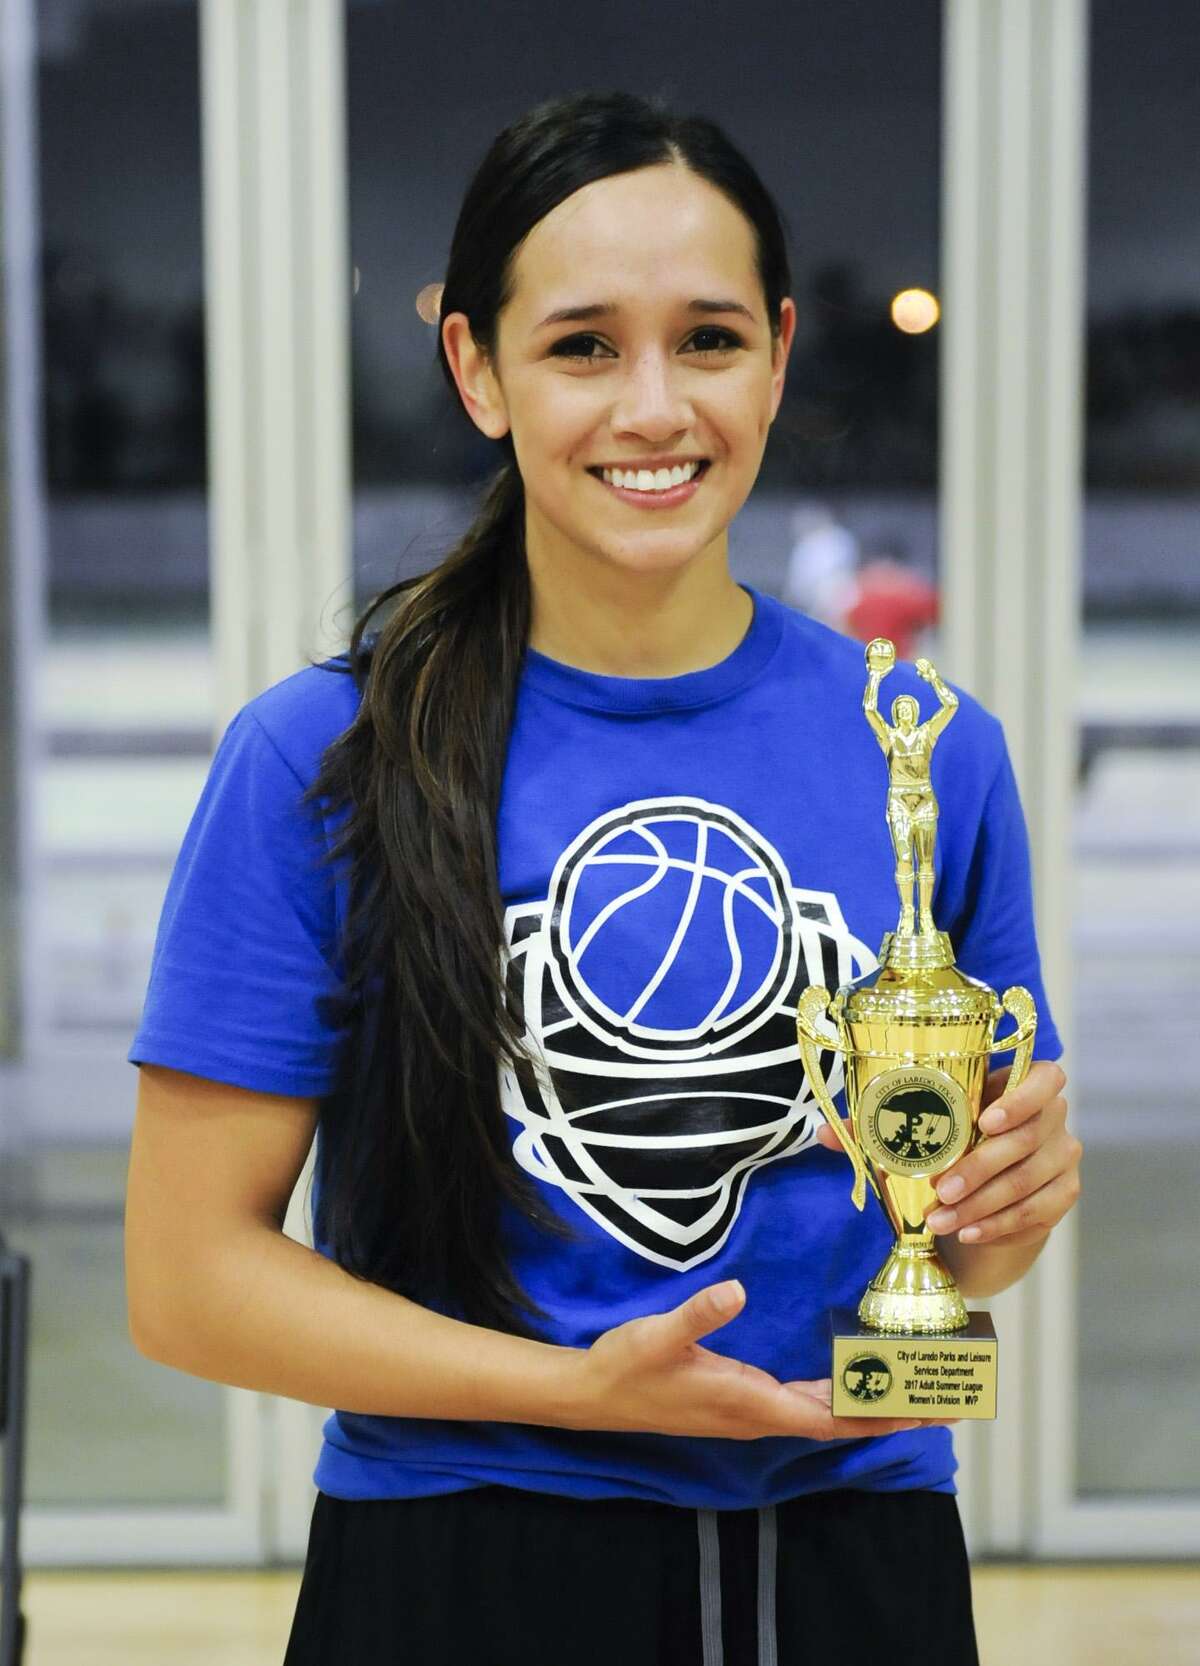 Mary Encinas won the postseason MVP award as the Riptide defeated the Old Stars for the 2017 Laredo Adult Basketball League championship Thursday.